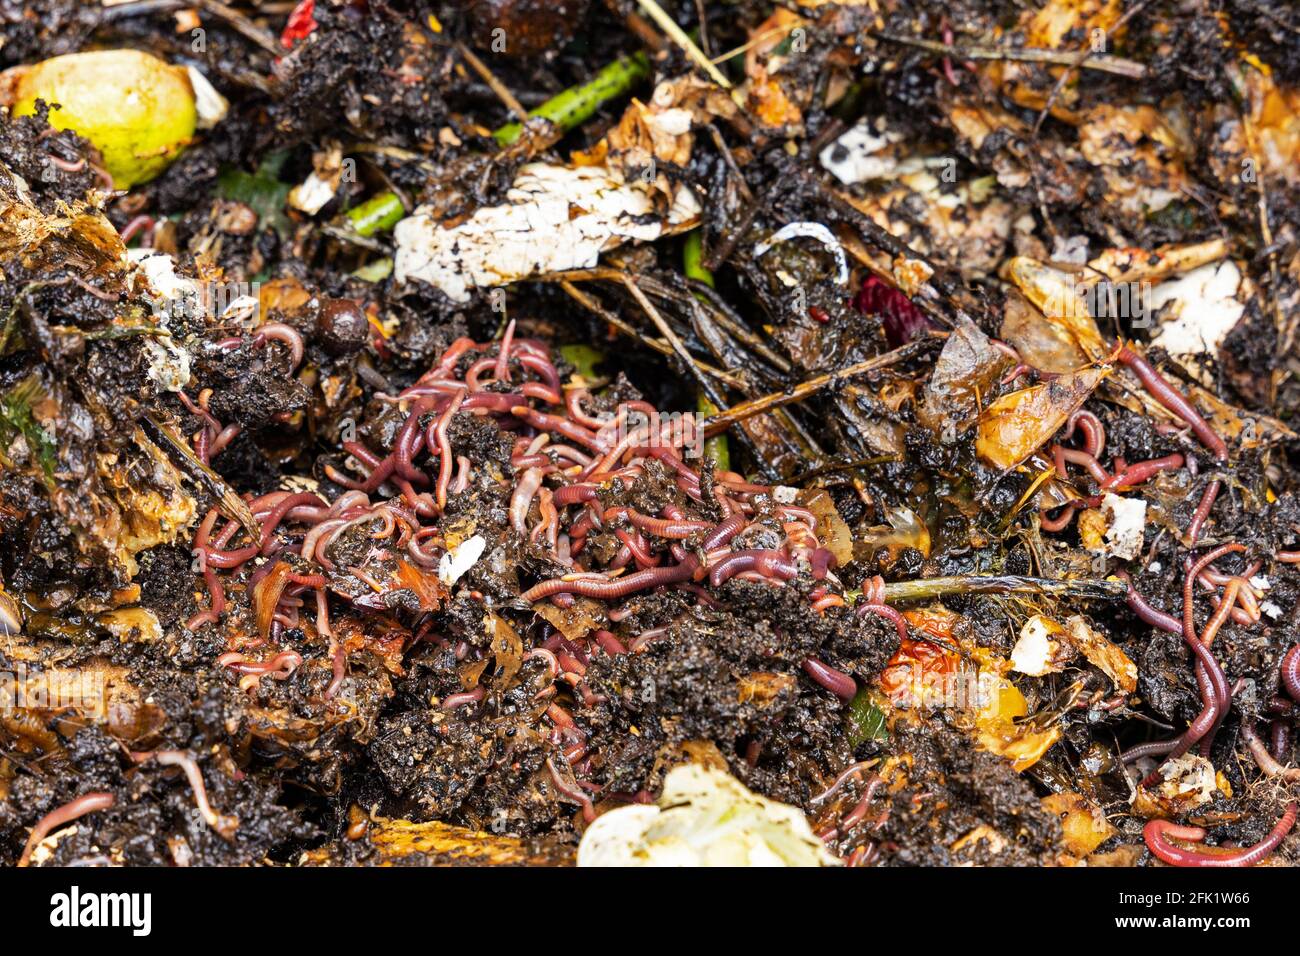 lots of worms in a compost eat kitchen waste to produce good soil Stock Photo